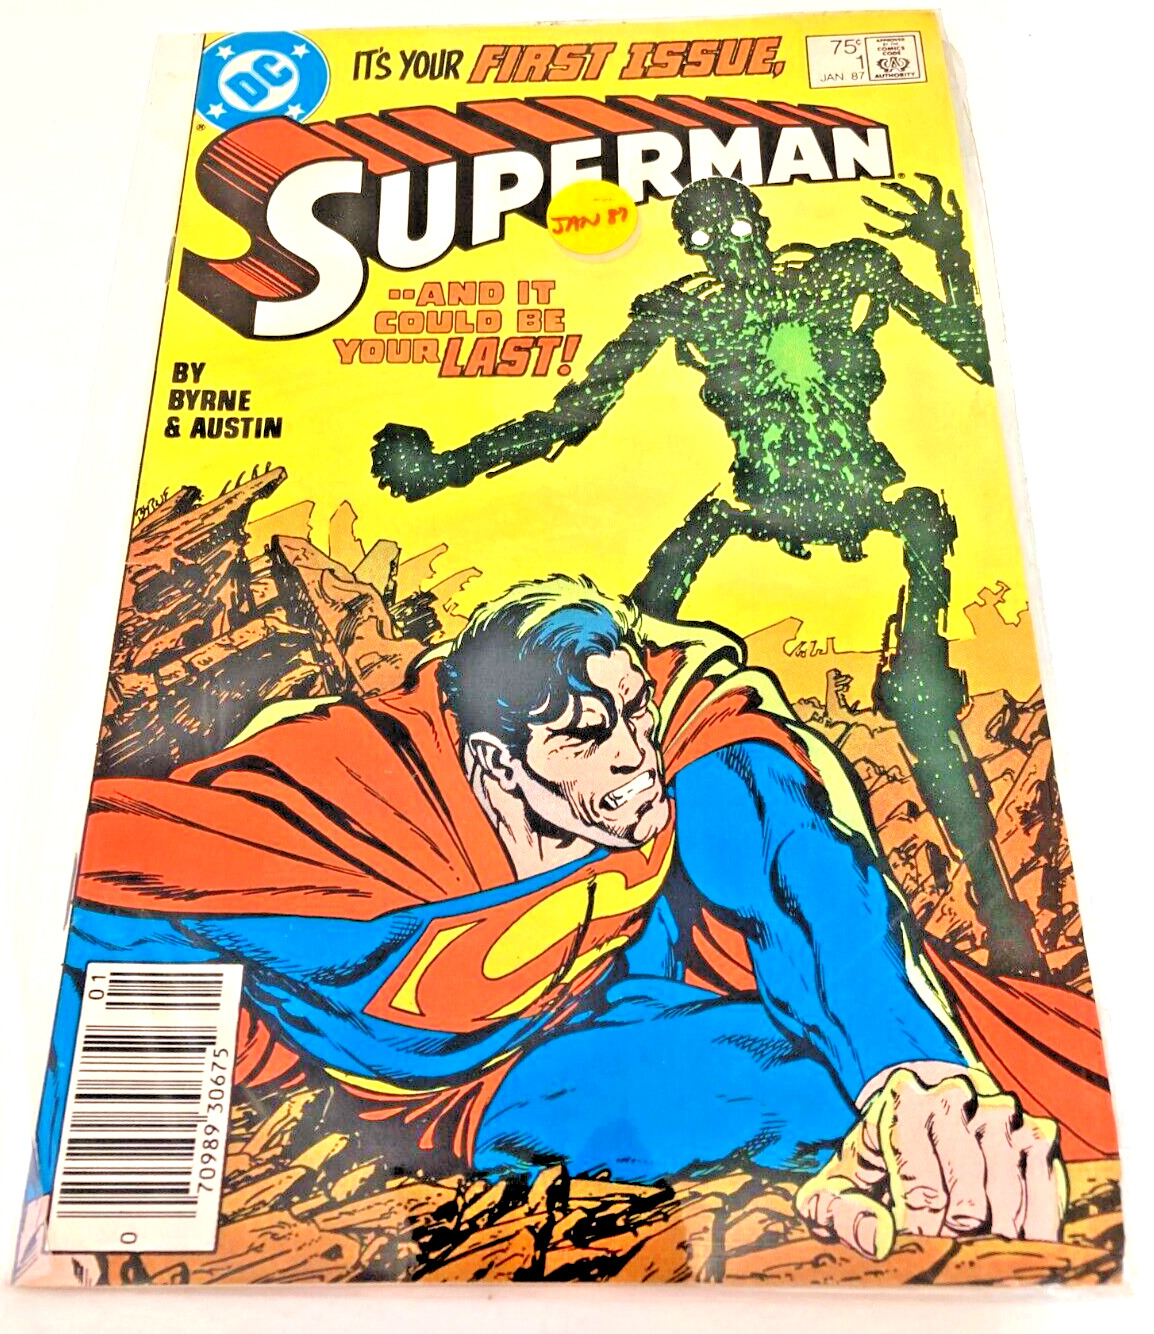 DC Comics 1987 Its Your First Issue Superman 1 By Byrne And Austin